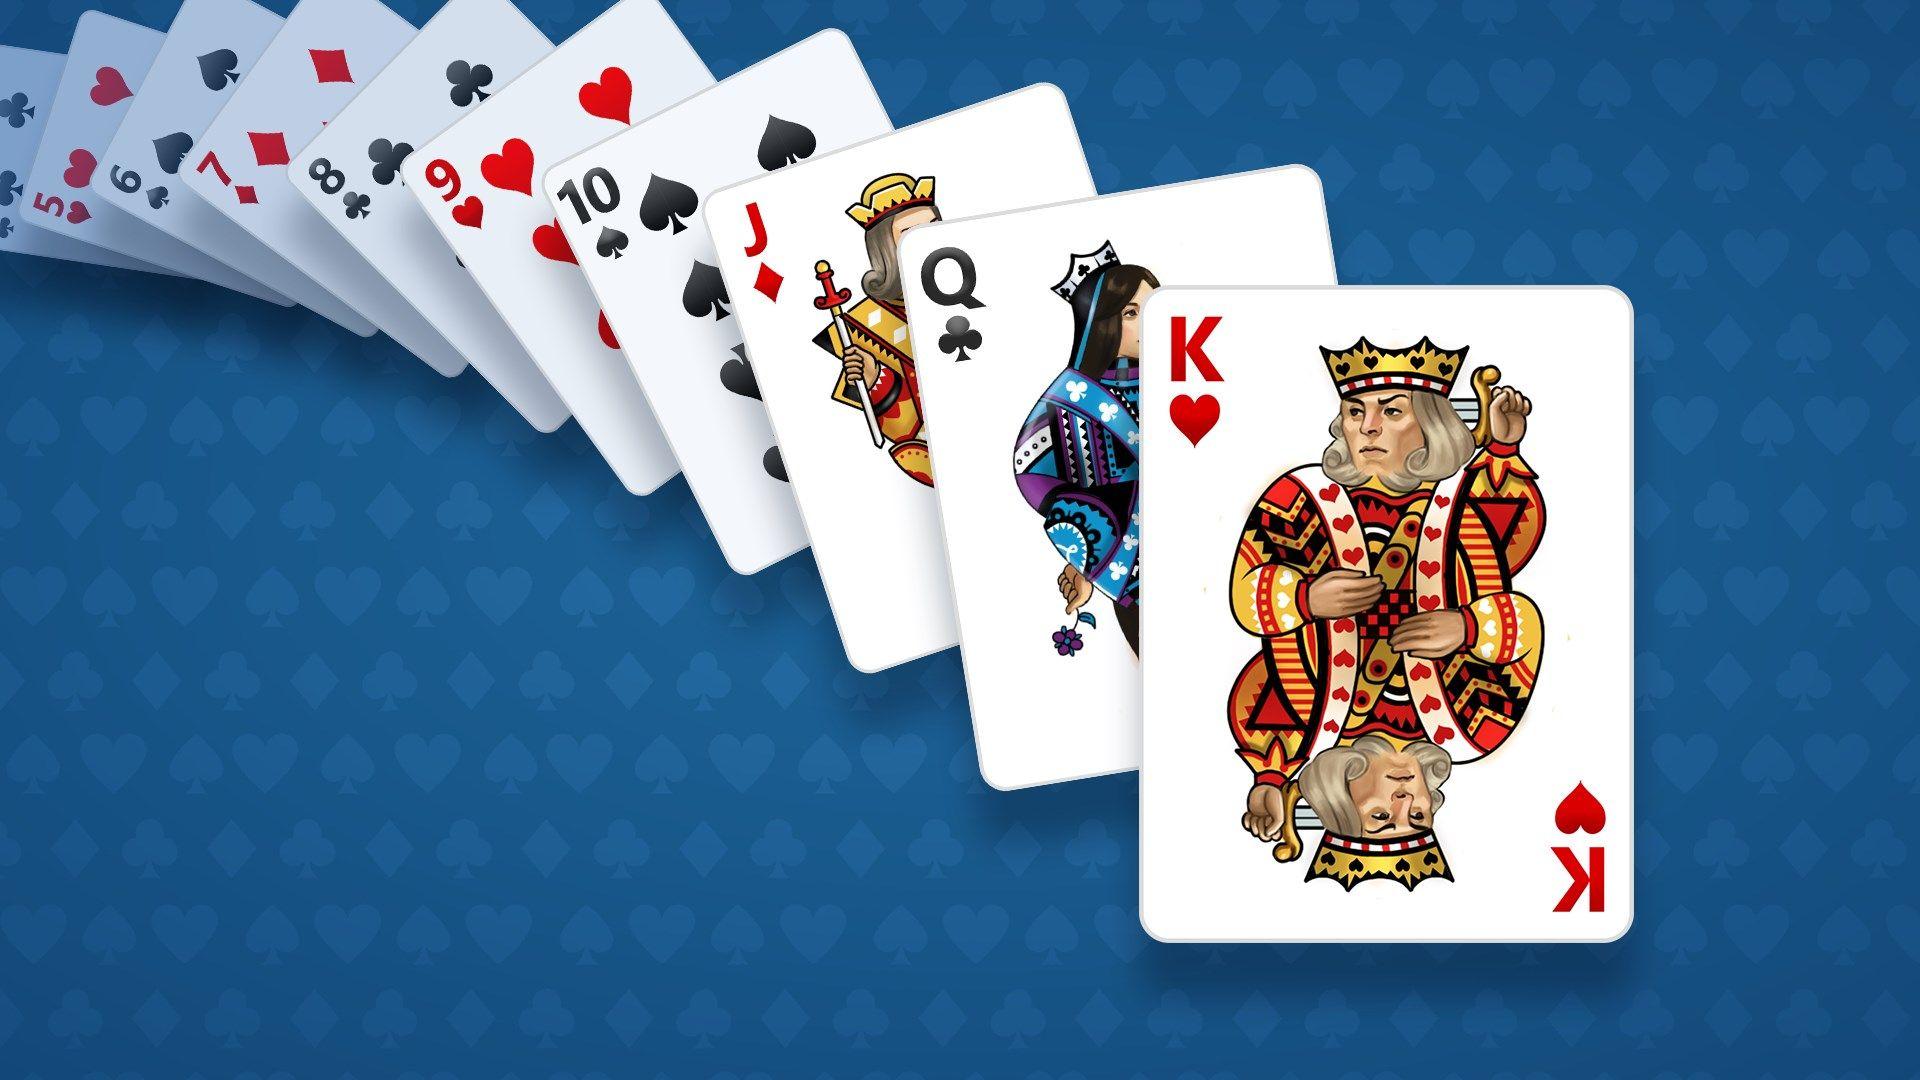 microsoft solitaire collection free download for windows 10 offline